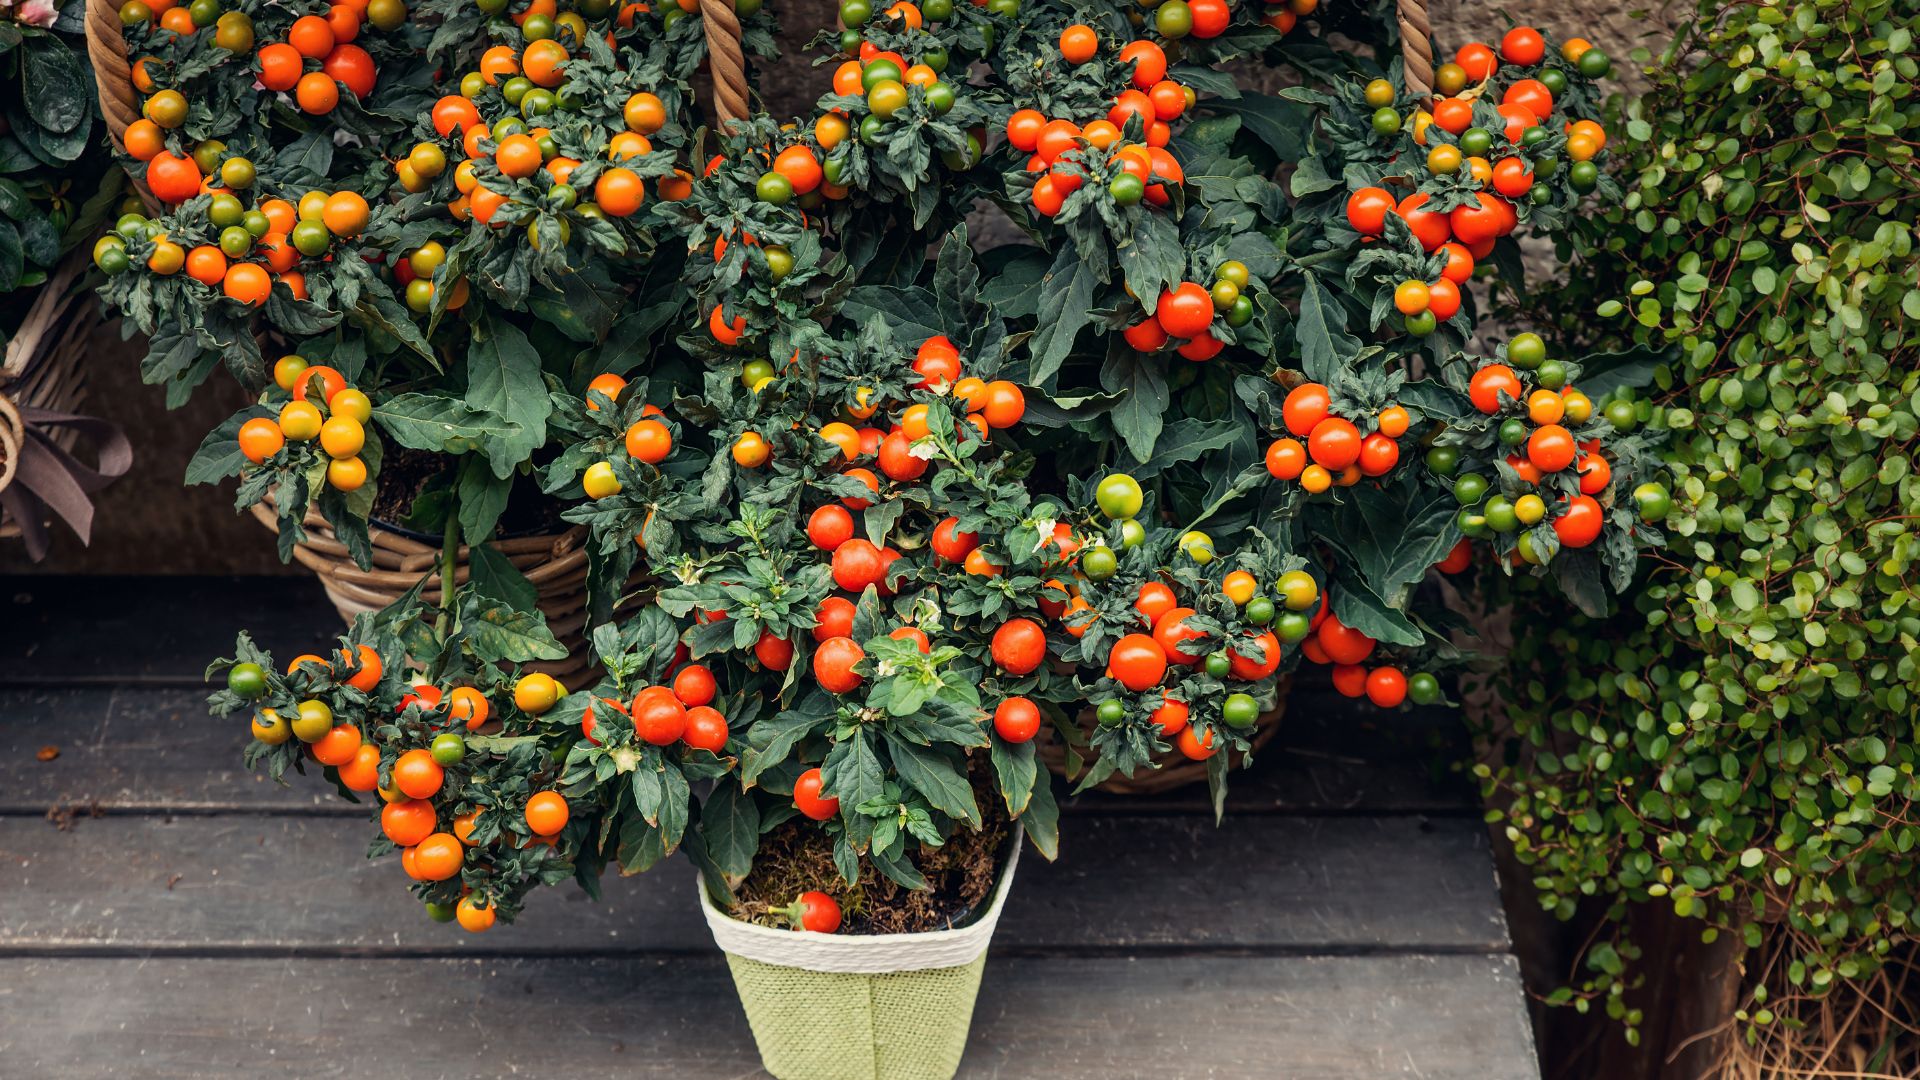 10 Mistakes You Should NEVER Make If You Want Plump, Juicy Tomatoes From Your Containers